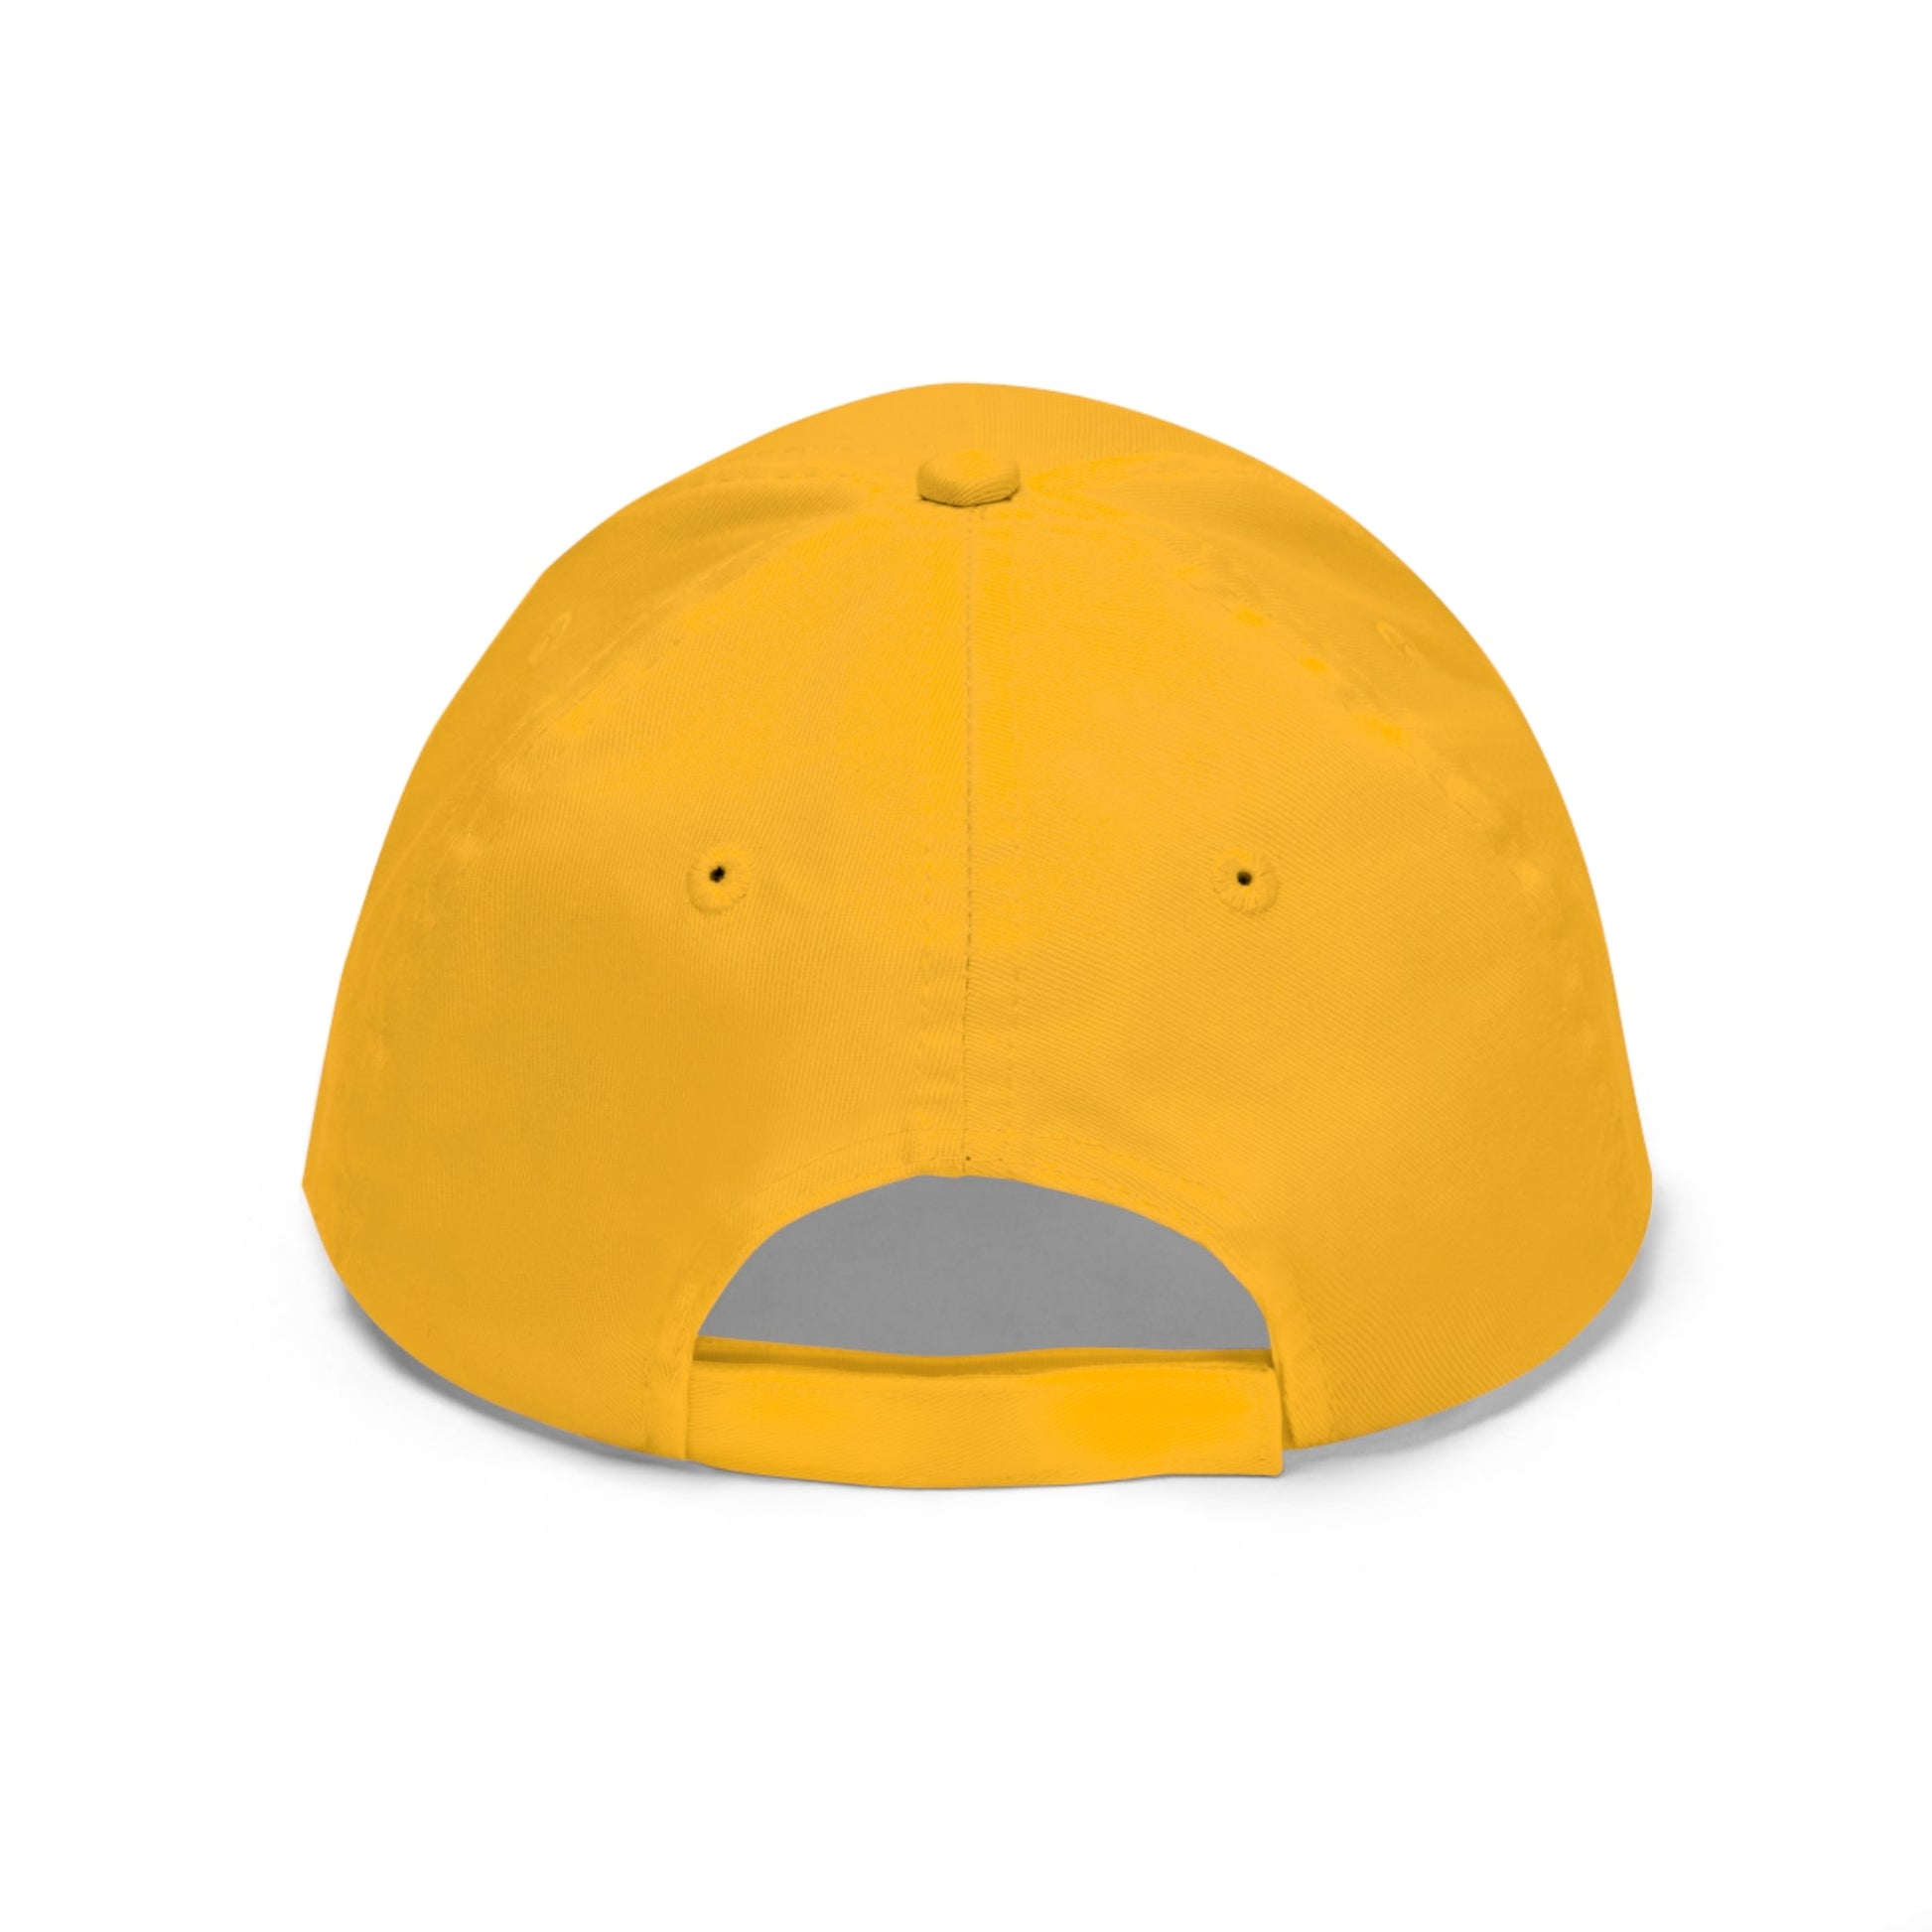 Pterodactyl Twill Hat | Paleontologist Gift for Dinosaur Lovers